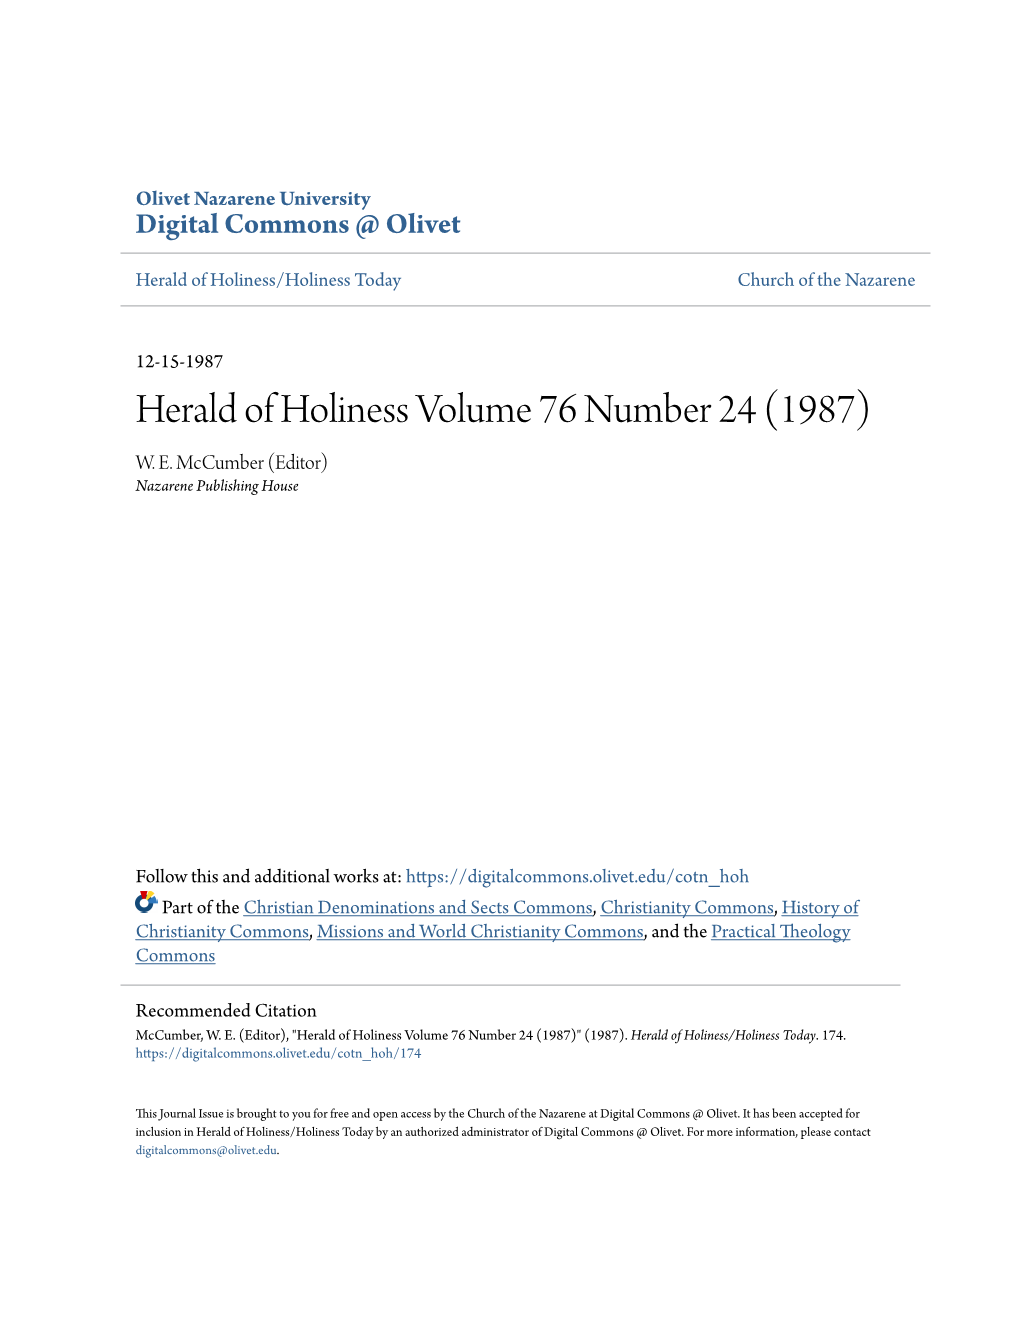 Herald of Holiness Volume 76 Number 24 (1987) W